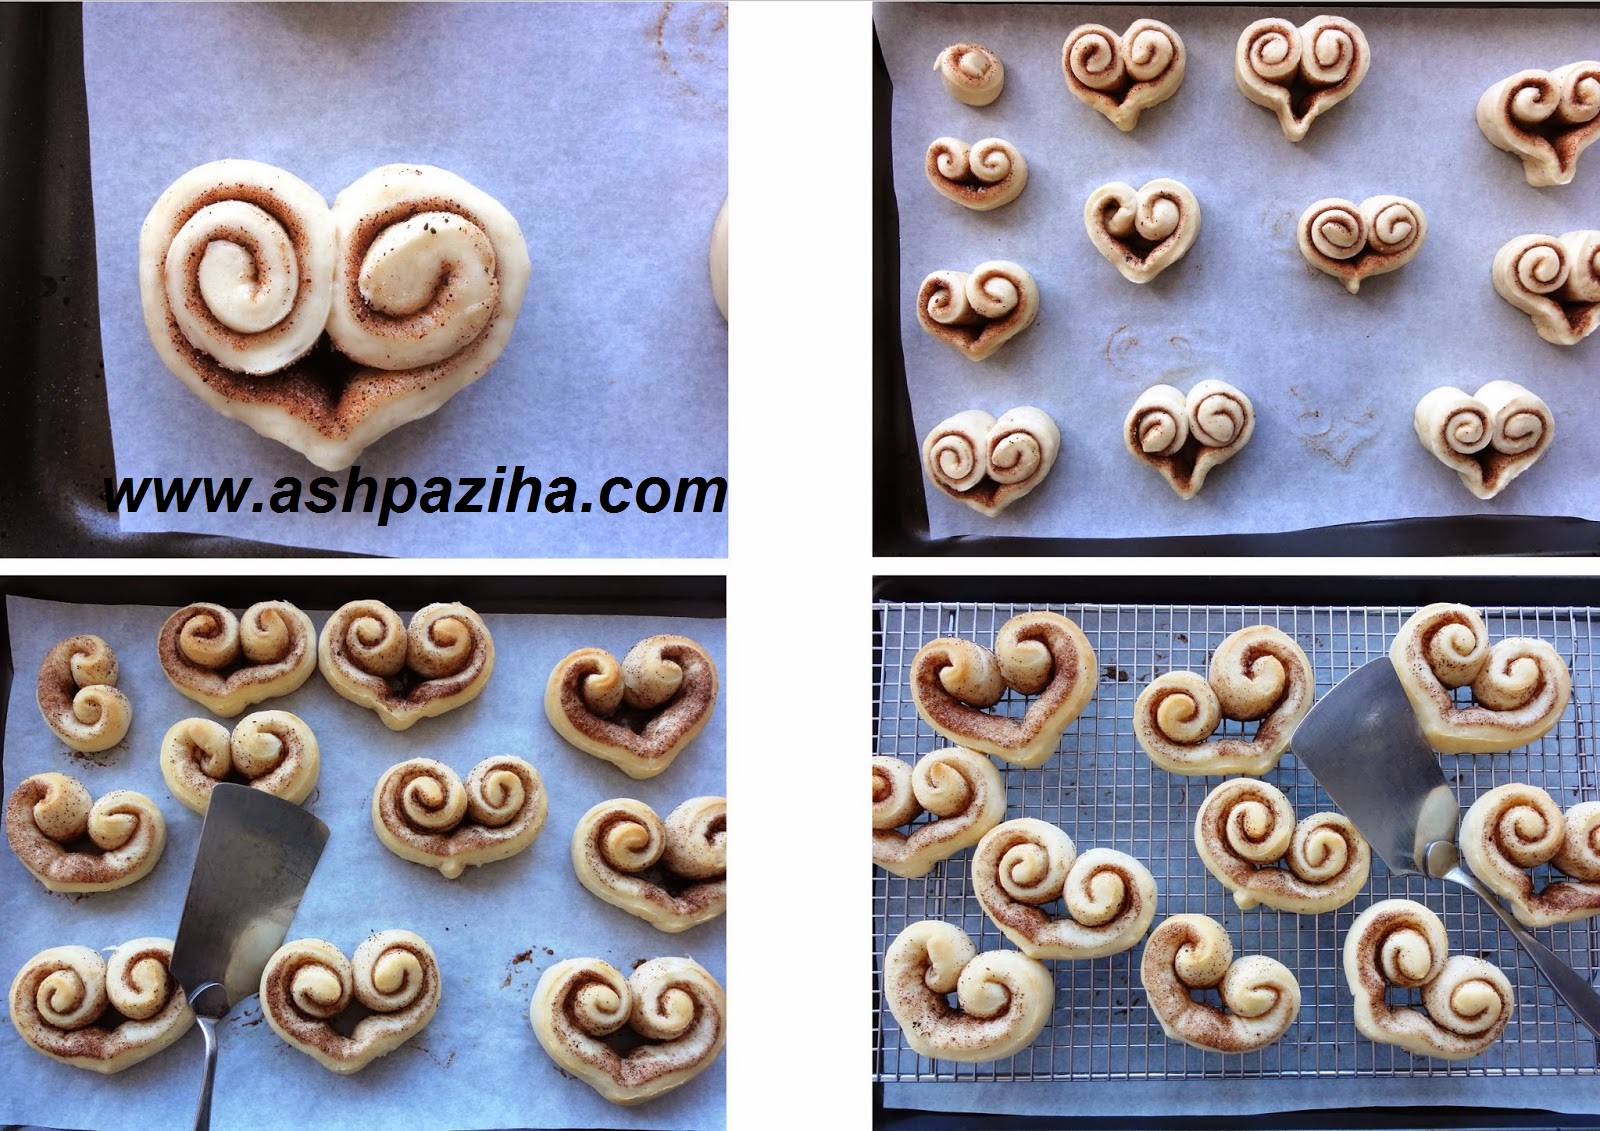 Recipes - cooking - rolls - cinnamon - heart - shaped - teaching - image (3)